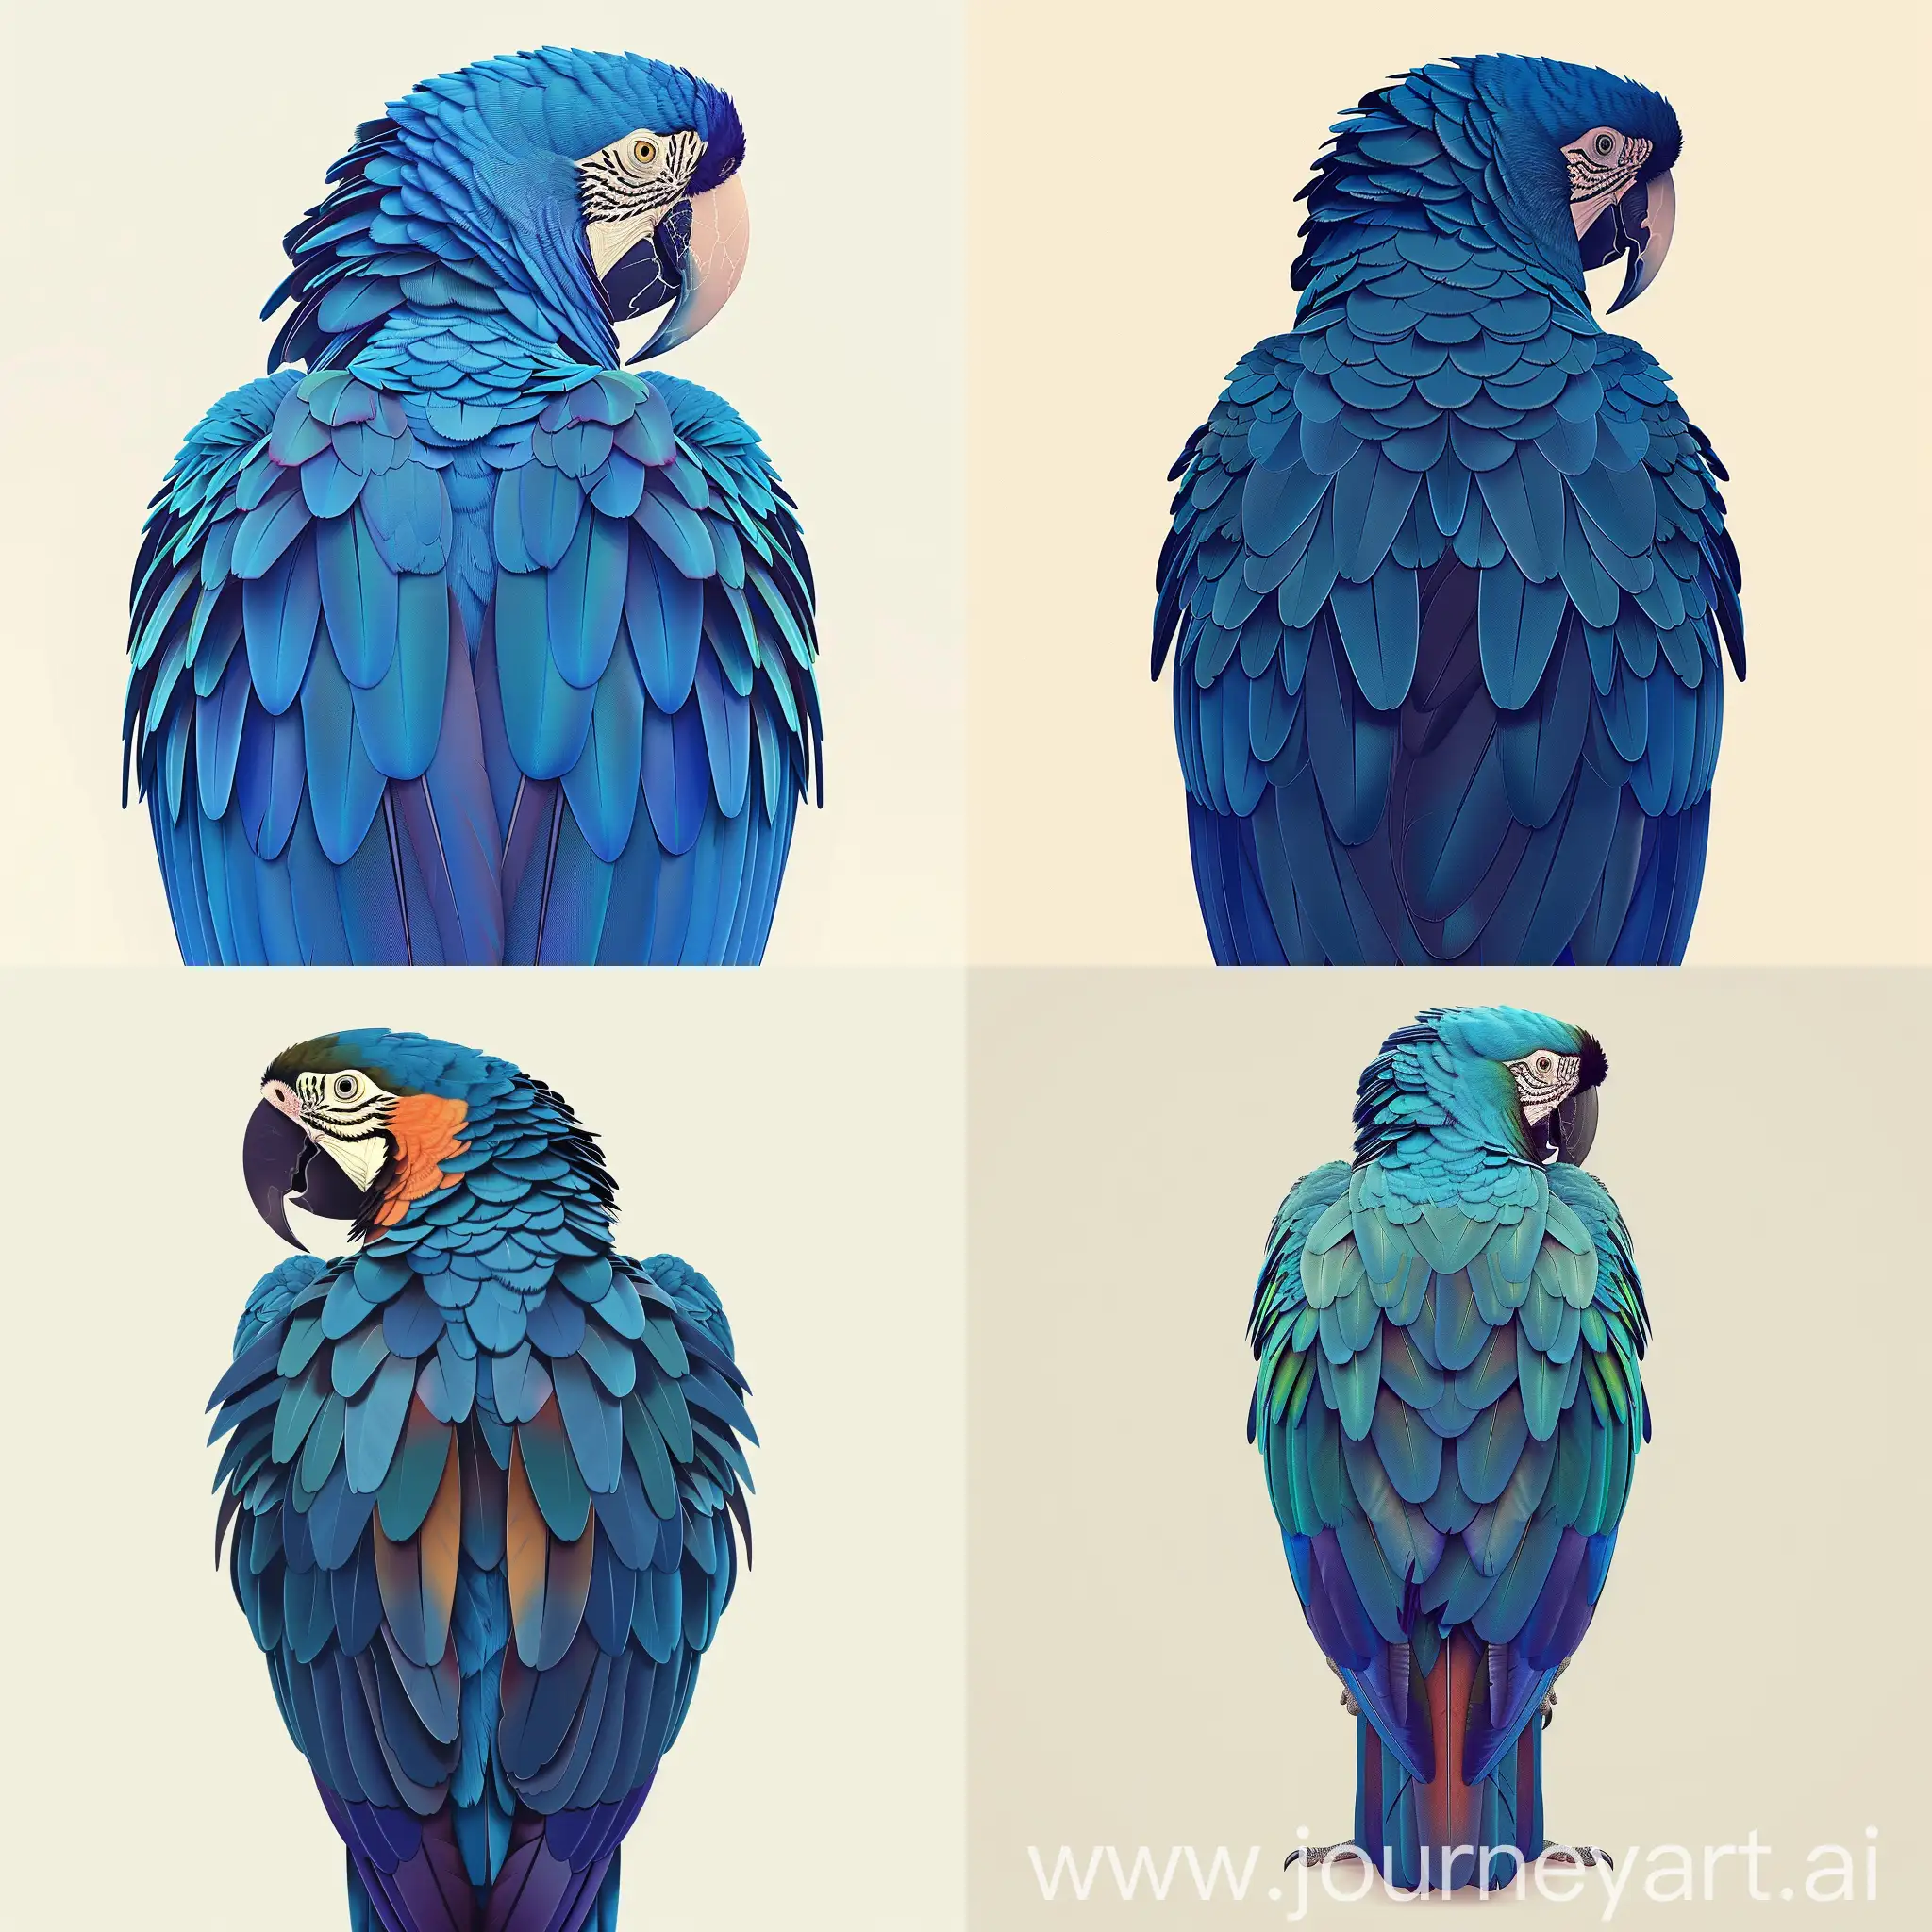 Flat illustration of hyacinth macaw from behind, plain off white background, Hyper-detailed, Insane details, Intricate details, Beautifully color graded,